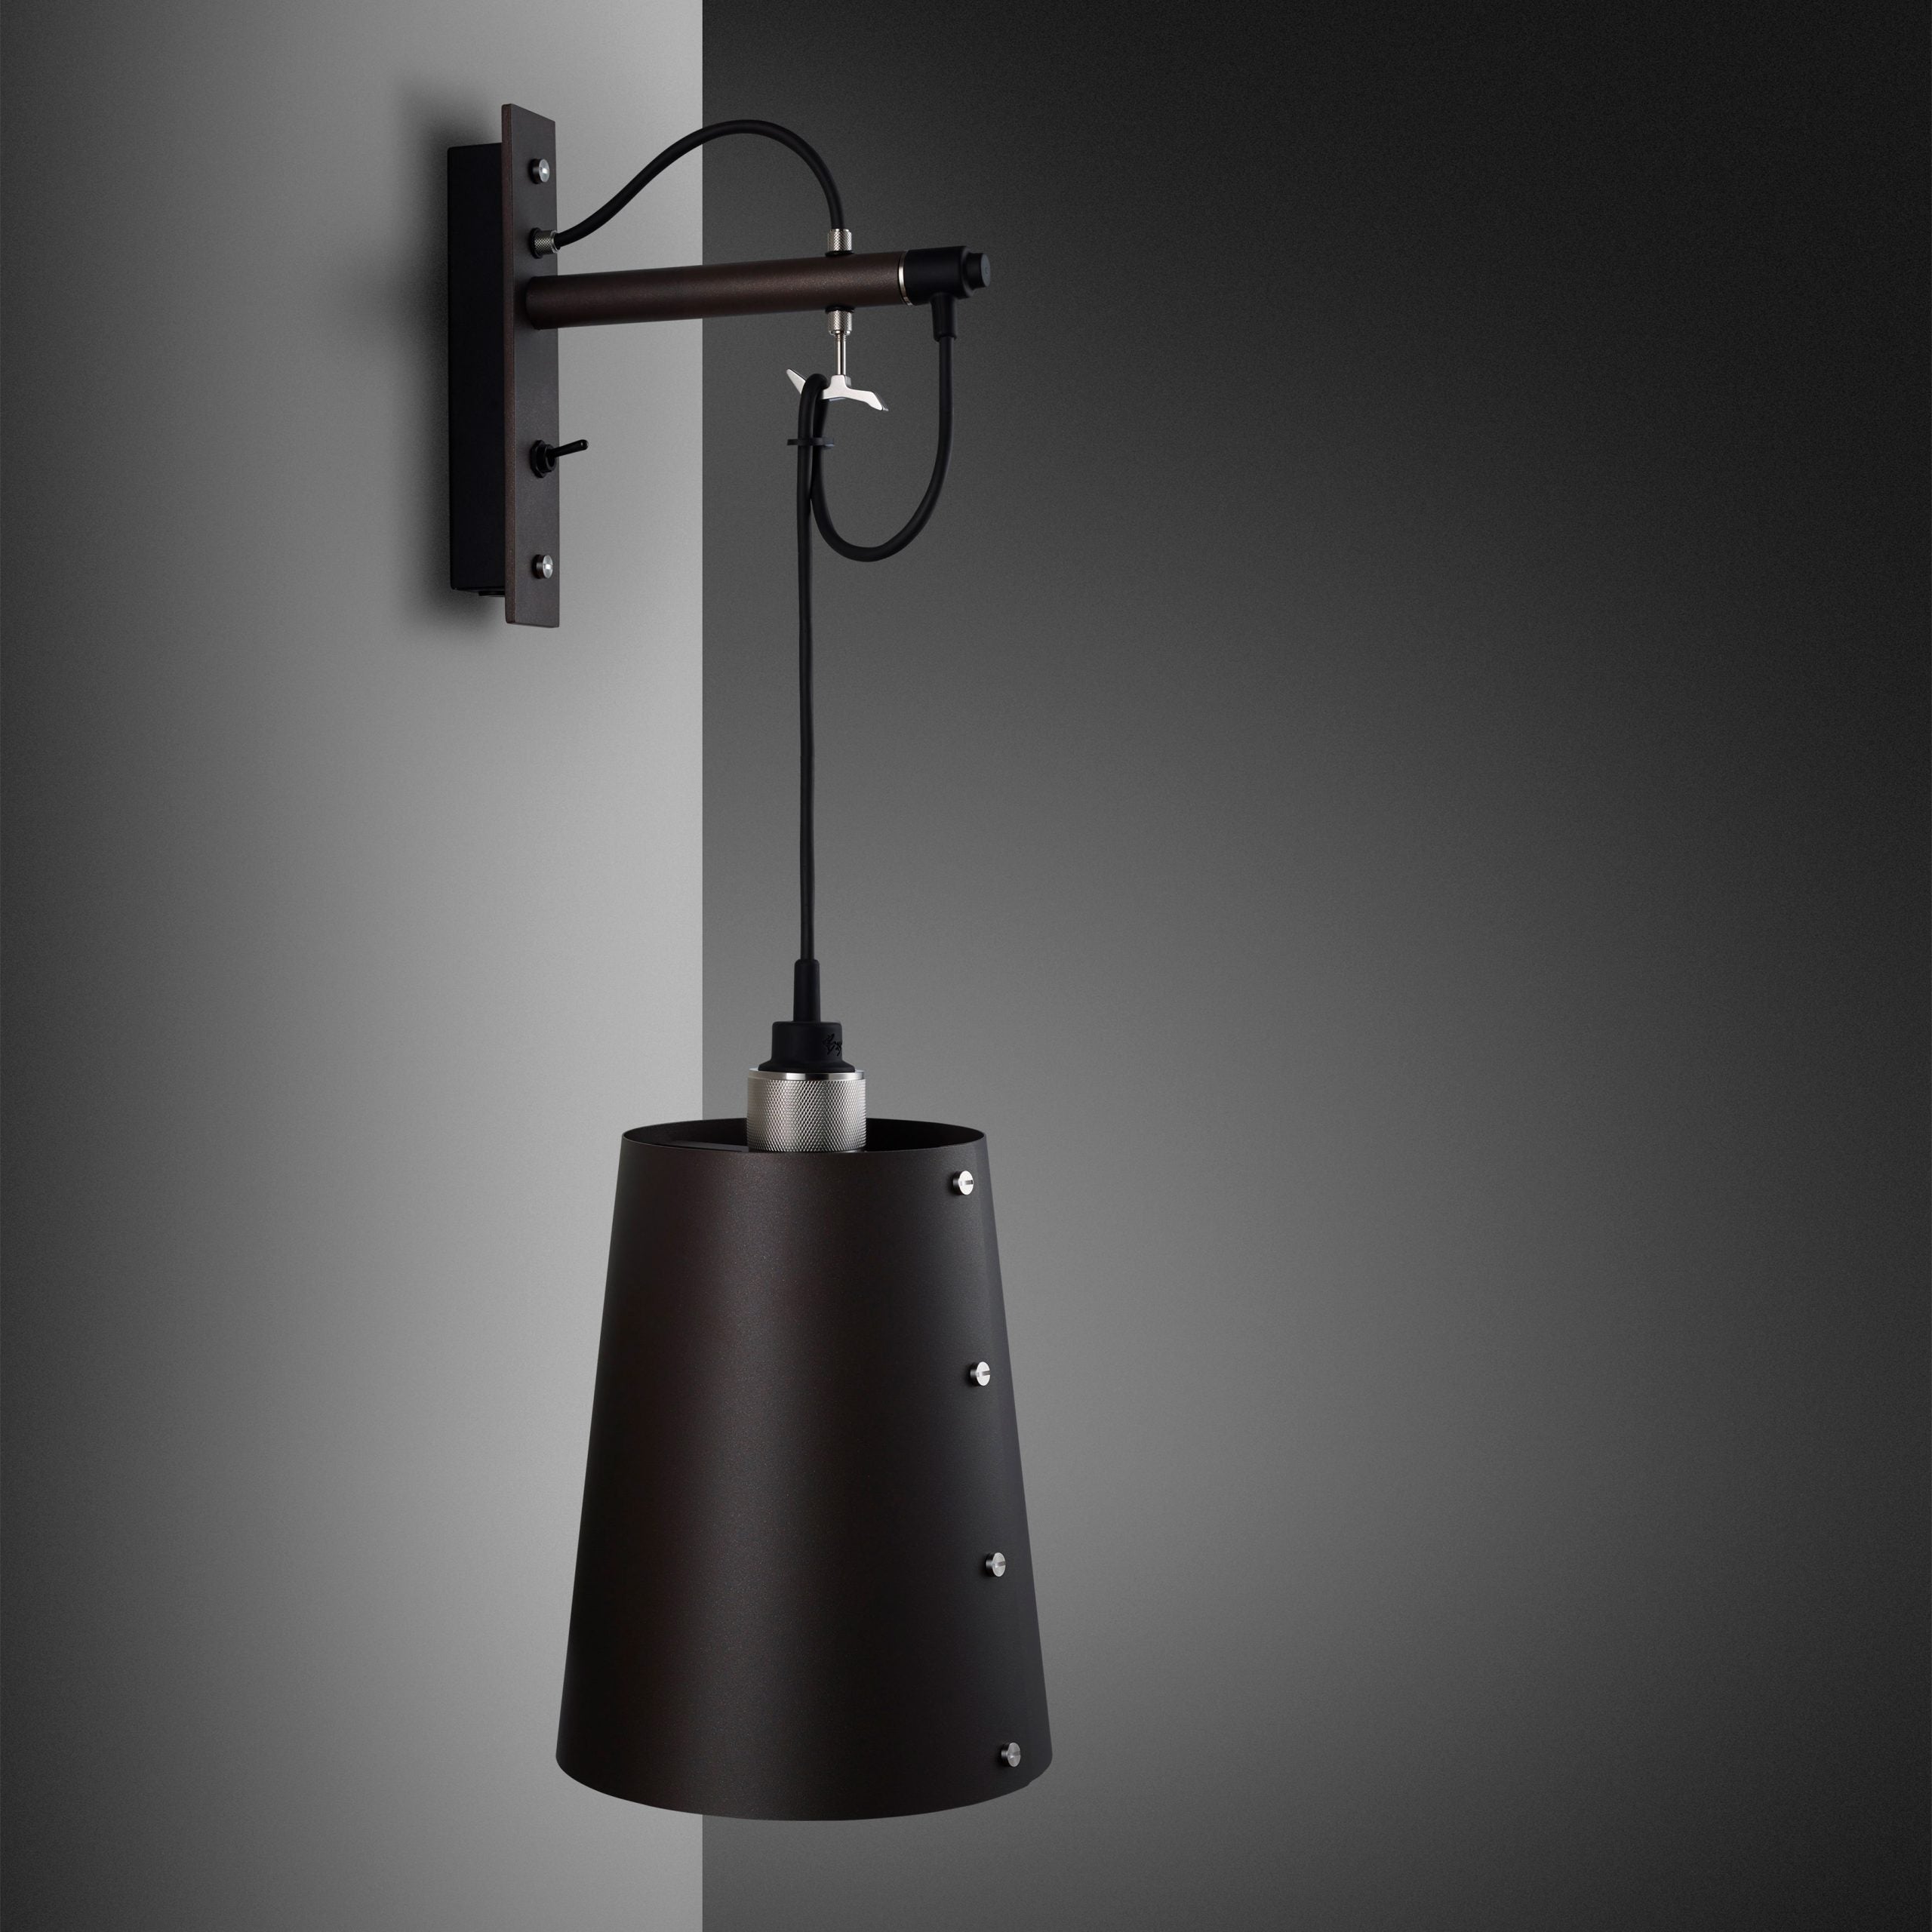 Buster + Punch Hooked Wall Sconce Wall Light Fixtures Buster + Punch Graphite/Steel & Graphite Shade Large 